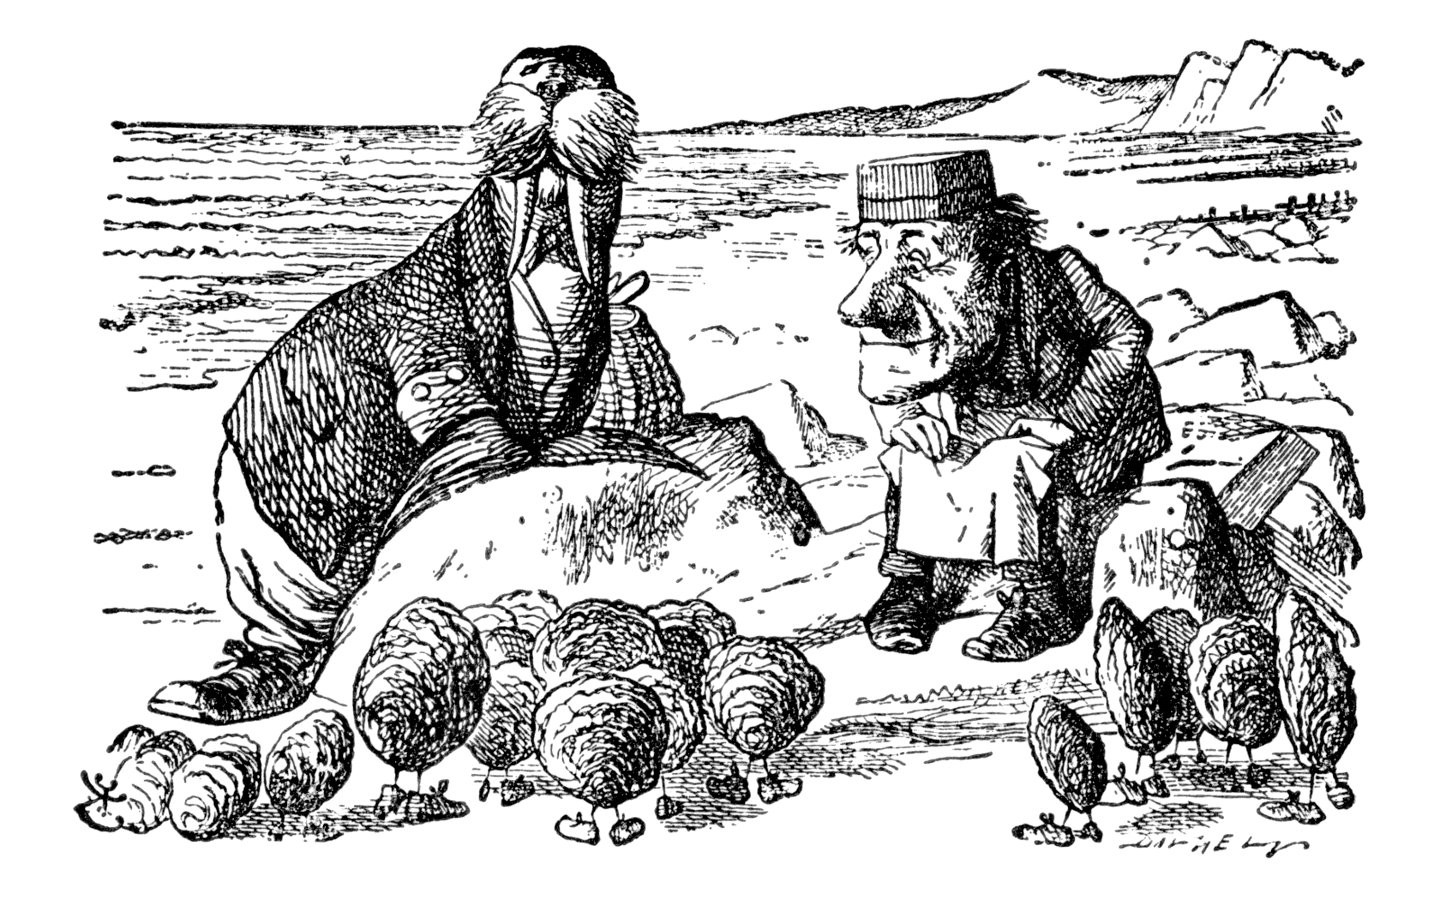 The Walrus and The Carpenter - ILLUSTRATION BY SIR JOHN TENNIEL